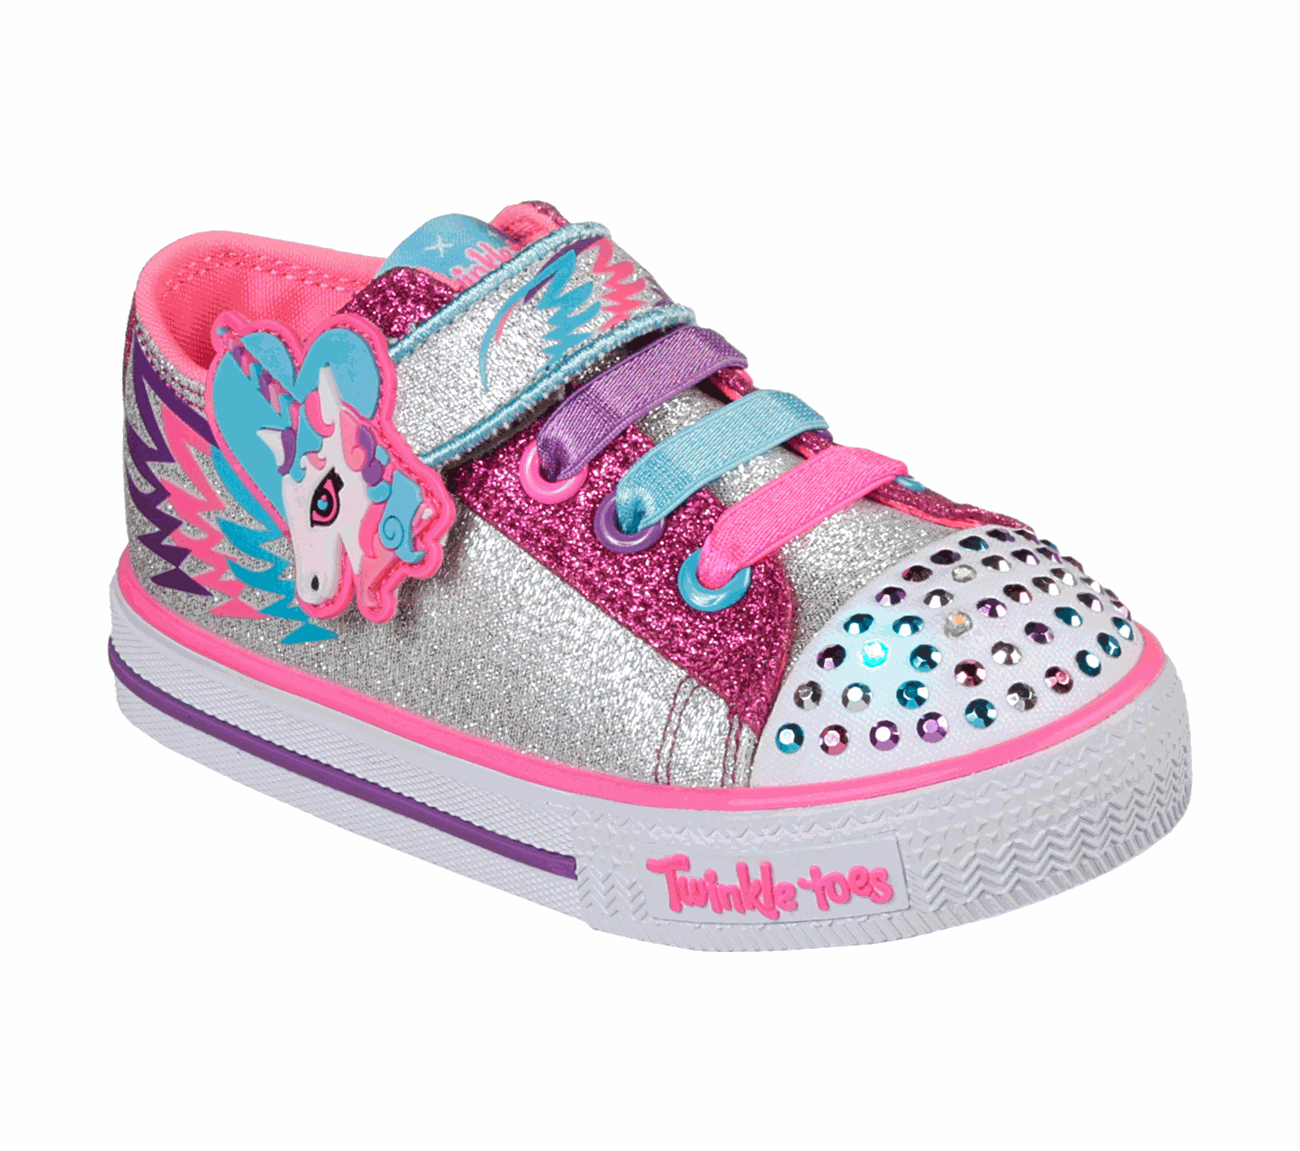 Buy SKECHERS Twinkle Toes: Shuffles - Party Pets S-Lights Shoes